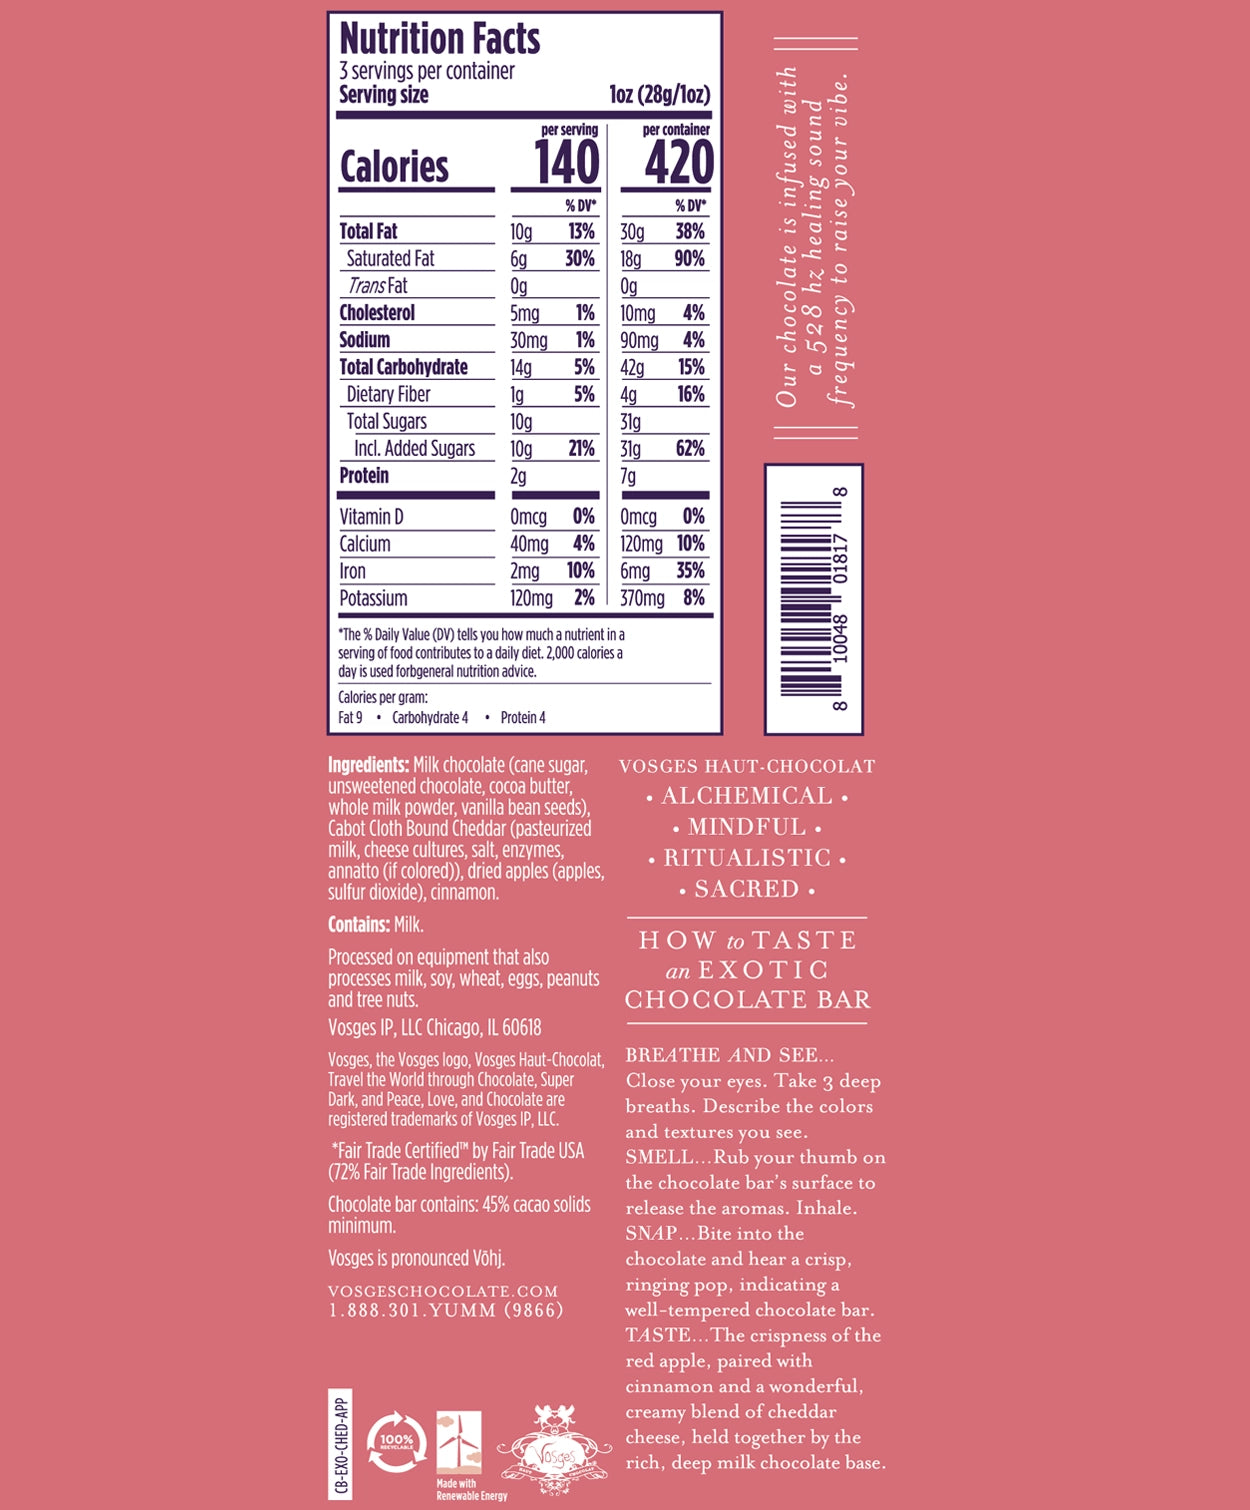 Nutrition Facts and Ingredients of Vosges Haut-Chocolat Cheddar and Apple bar in white, san-serif font on a bright pink background.